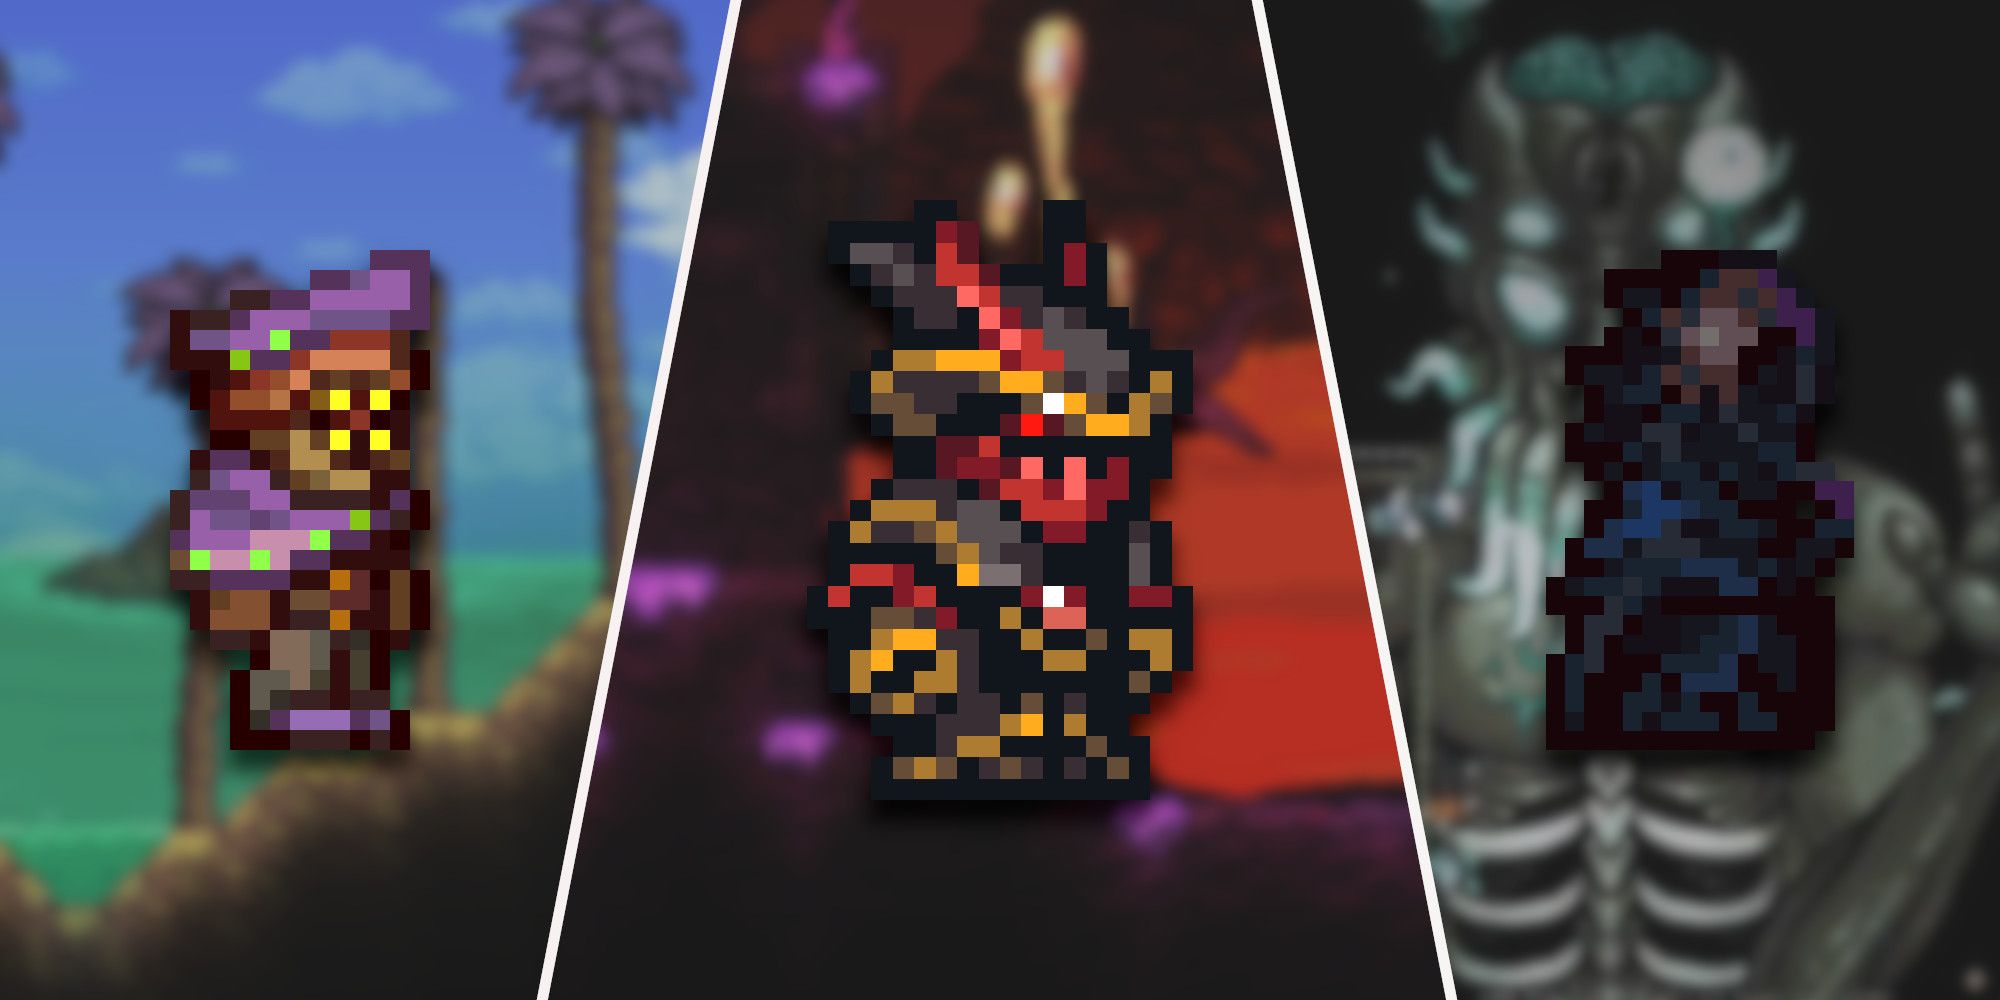 Sulphurous Armor, Bloodshade Armor, And Empyrean Armor From Terraria Calamity From Left To Right